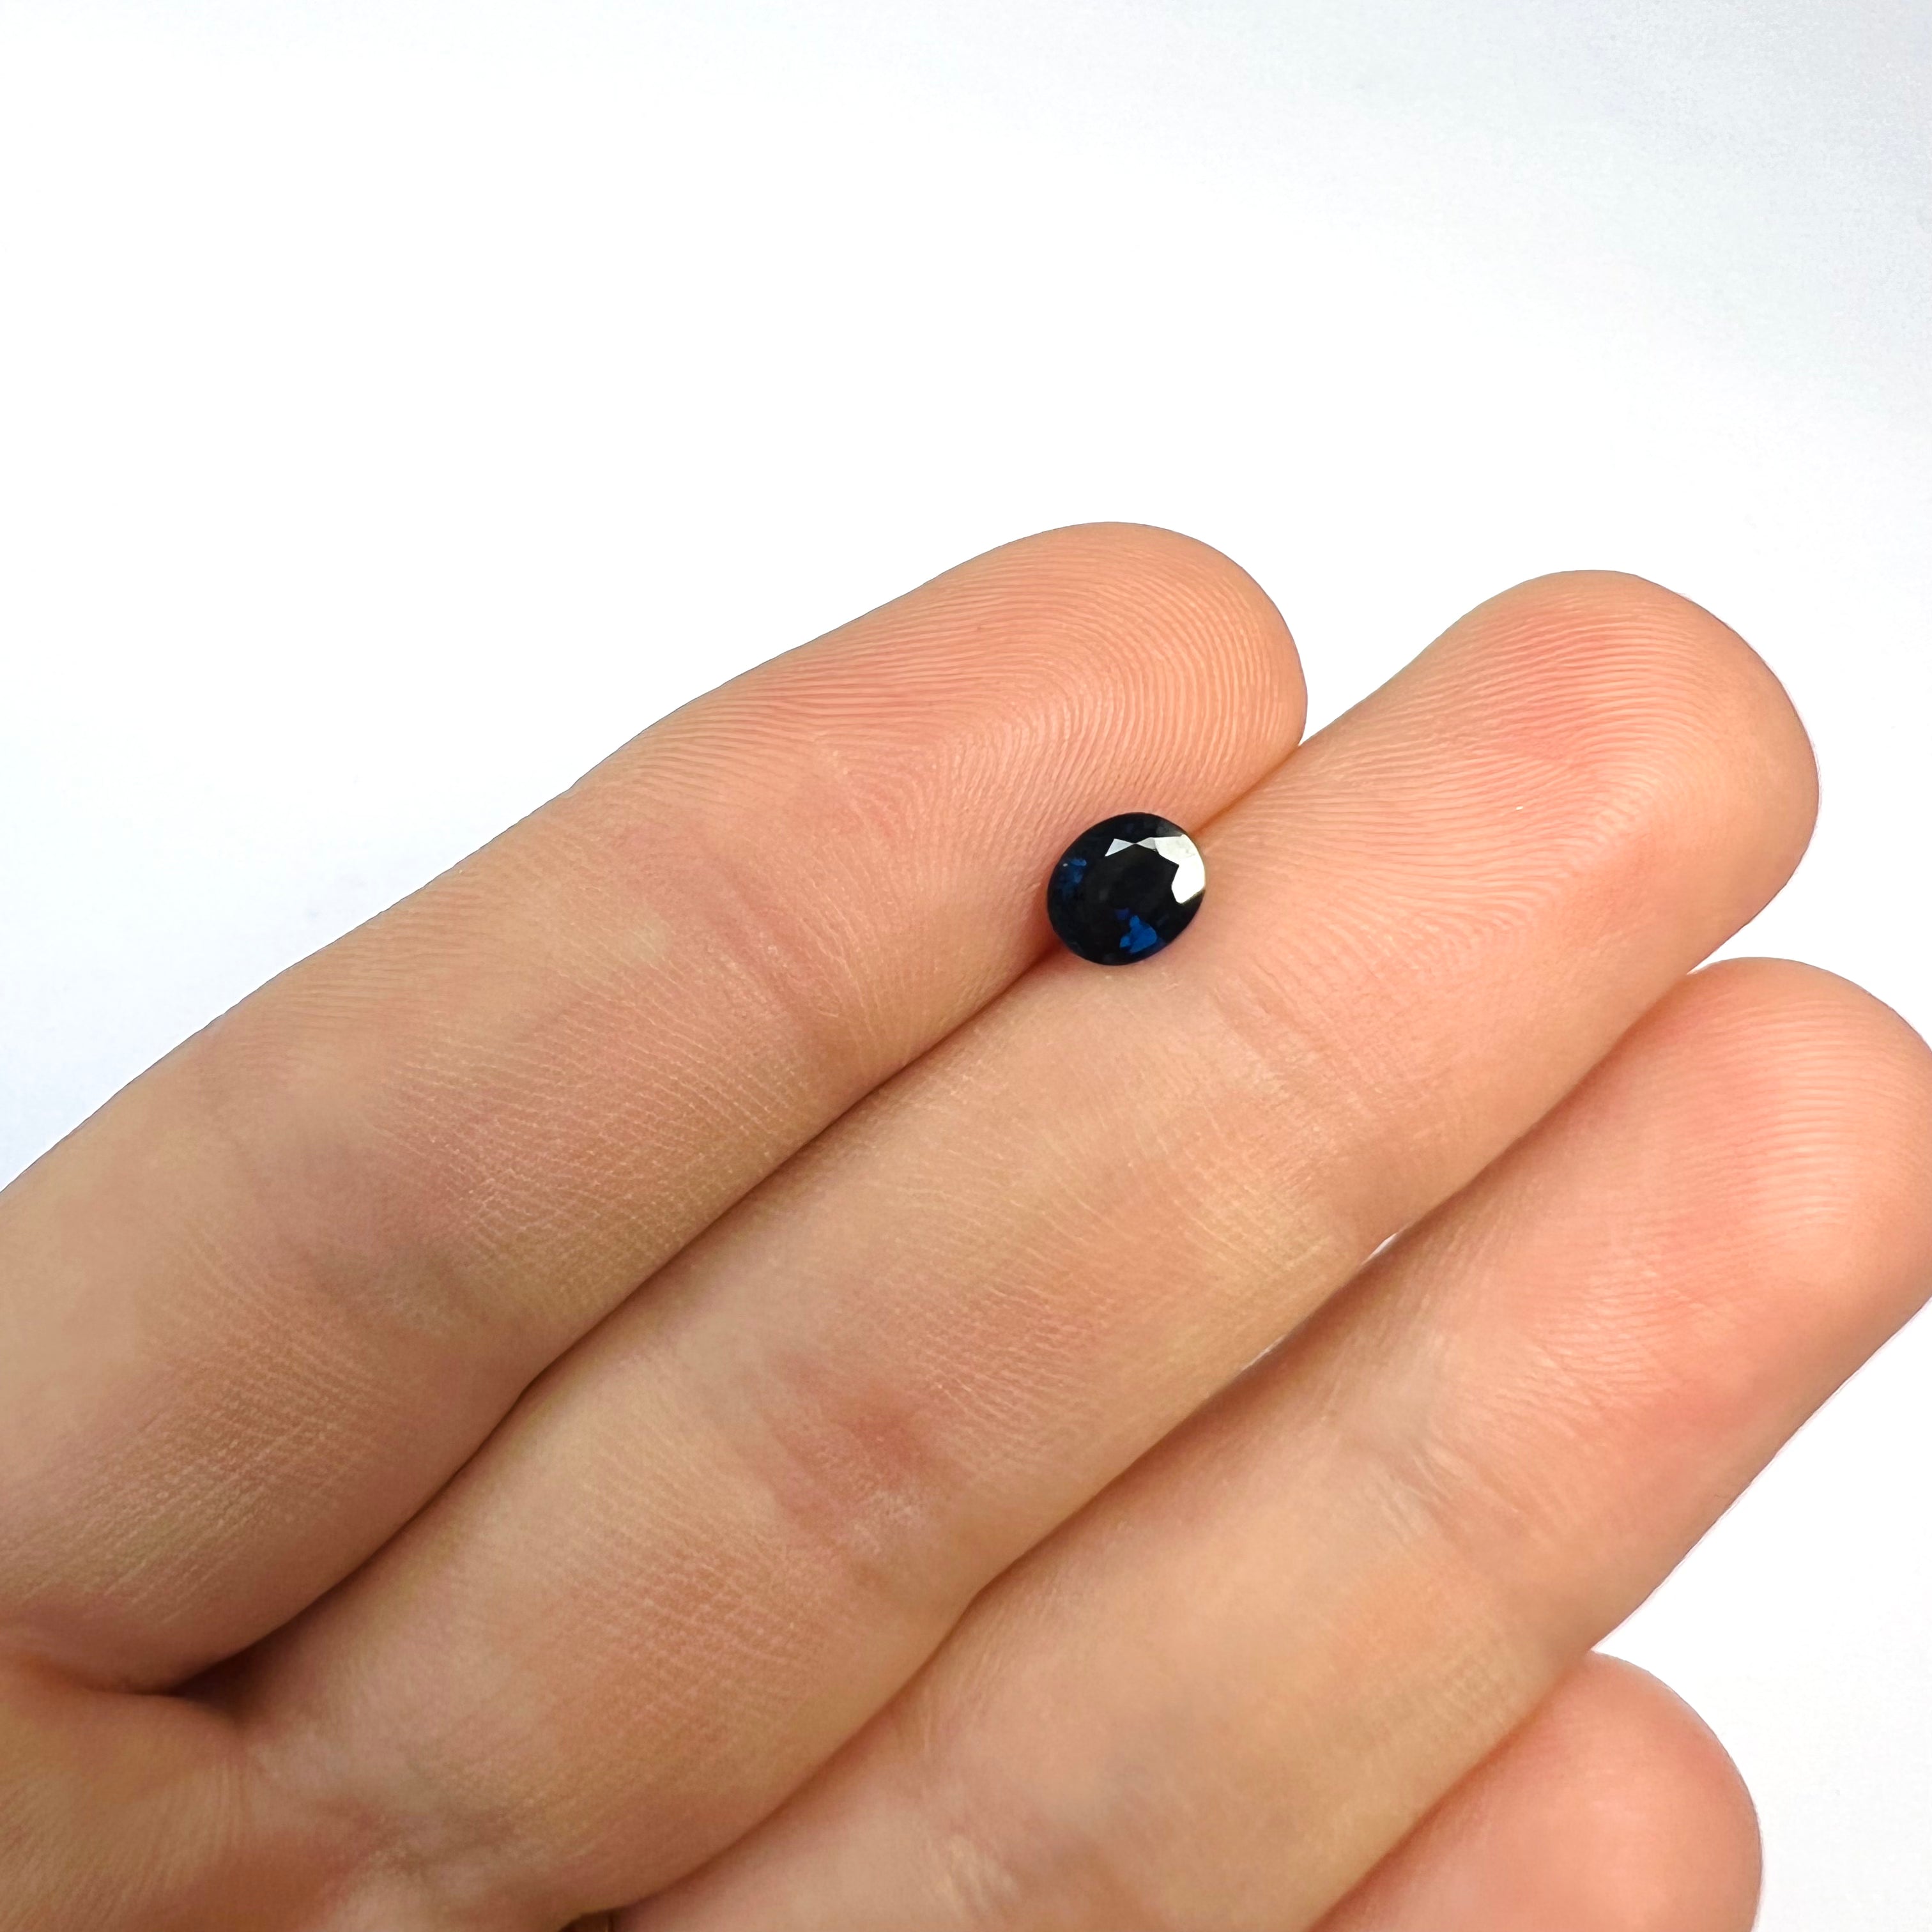 .80CT Loose Oval Blue Sapphire 6.01x5.03x3.01mm Earth mined Gemstone